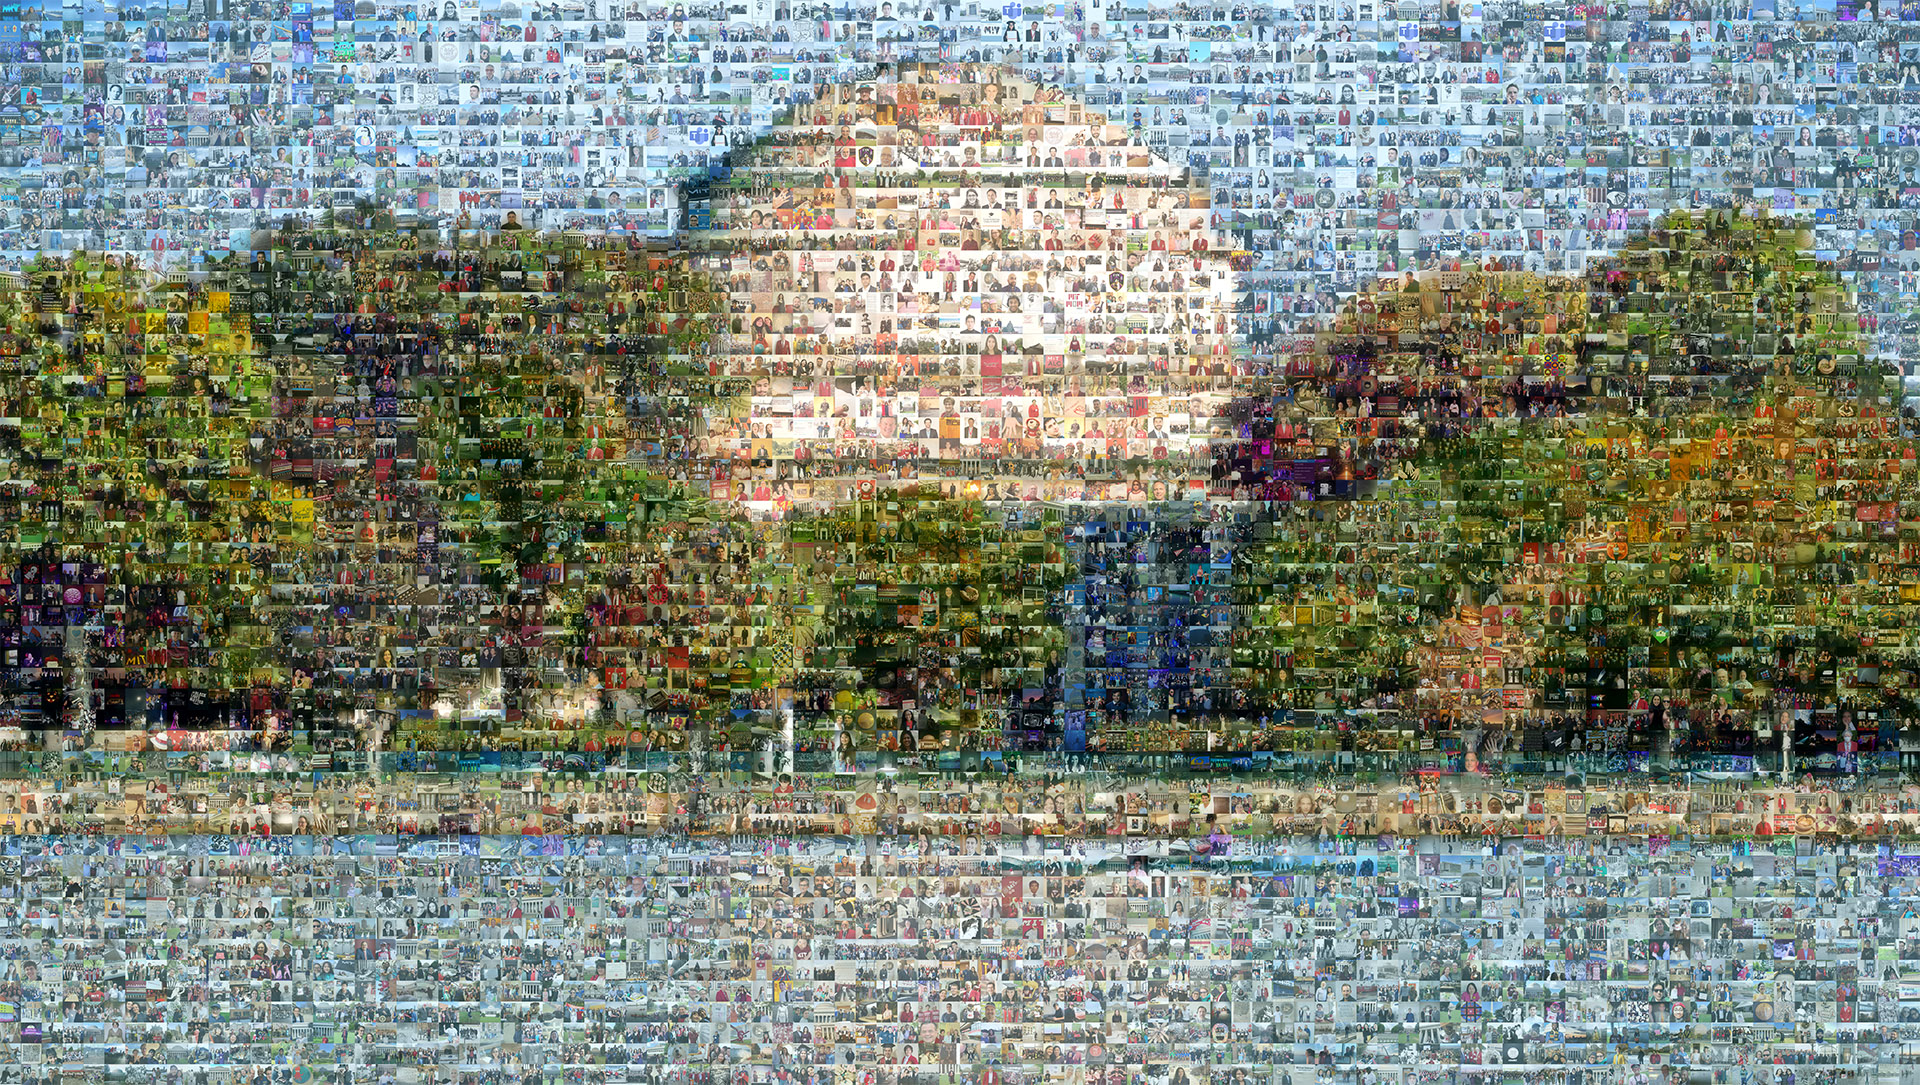 A mosaic of thousands of alumni photos form the image of MIT's Great Dome